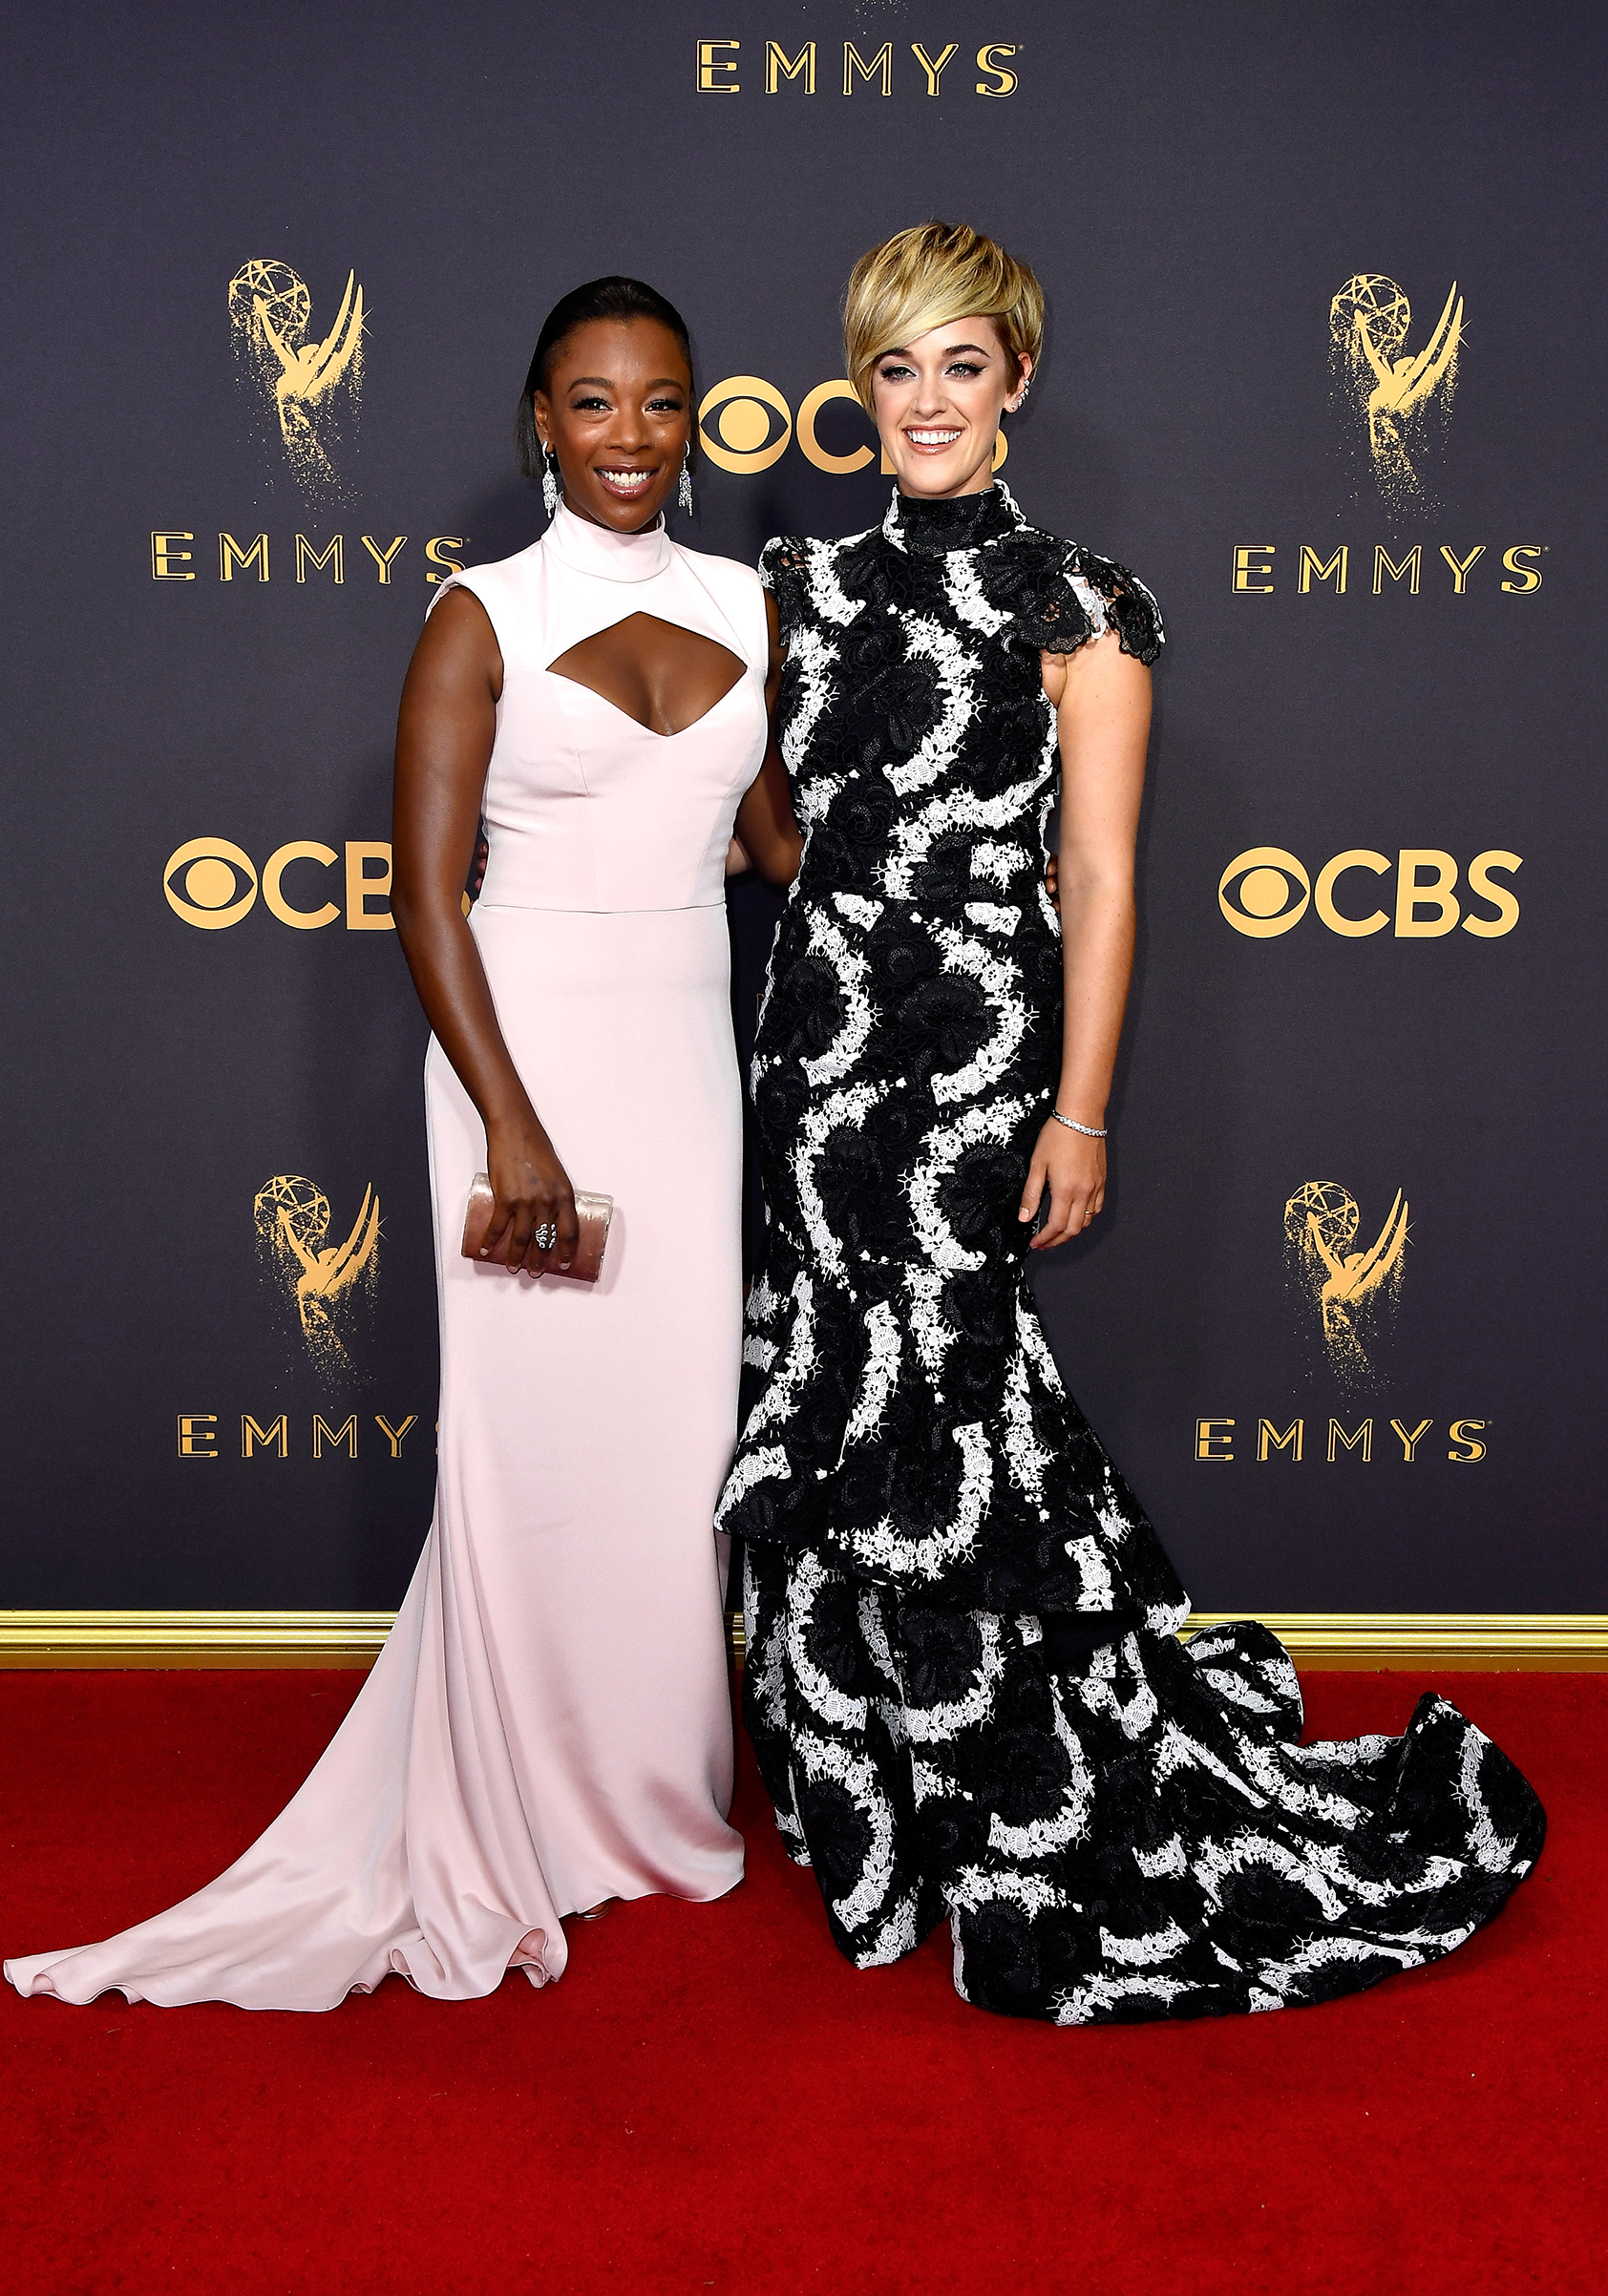 Actor Samira Wiley and Lauren Morelli attend the 69th Annual Primetime Emmy Awards at Microsoft Theater on September 17, 2017 in Los Angeles, California.